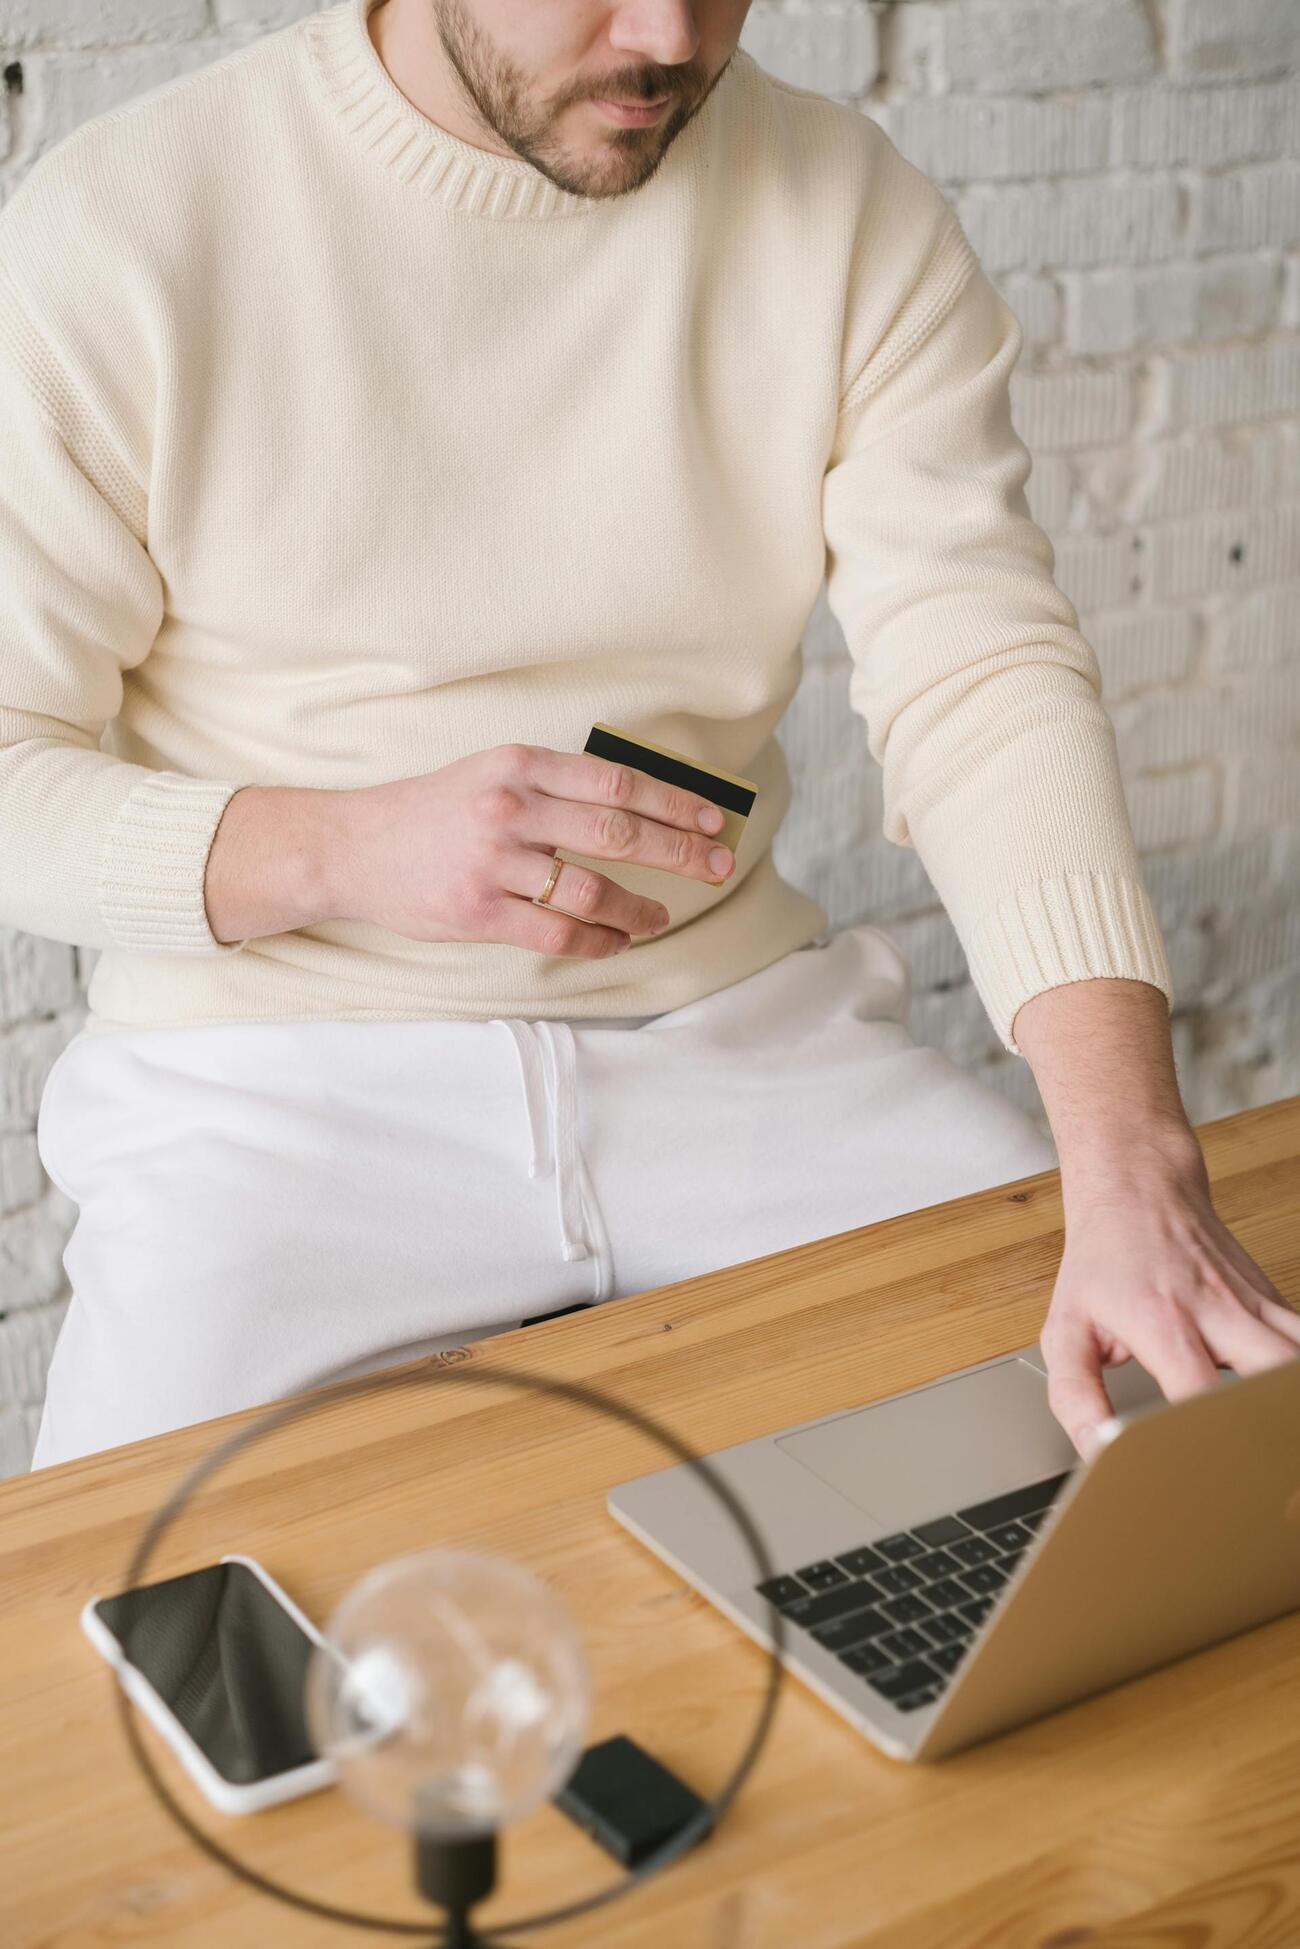 A man in a sweater sitting at a table, using a laptop and holding a credit card